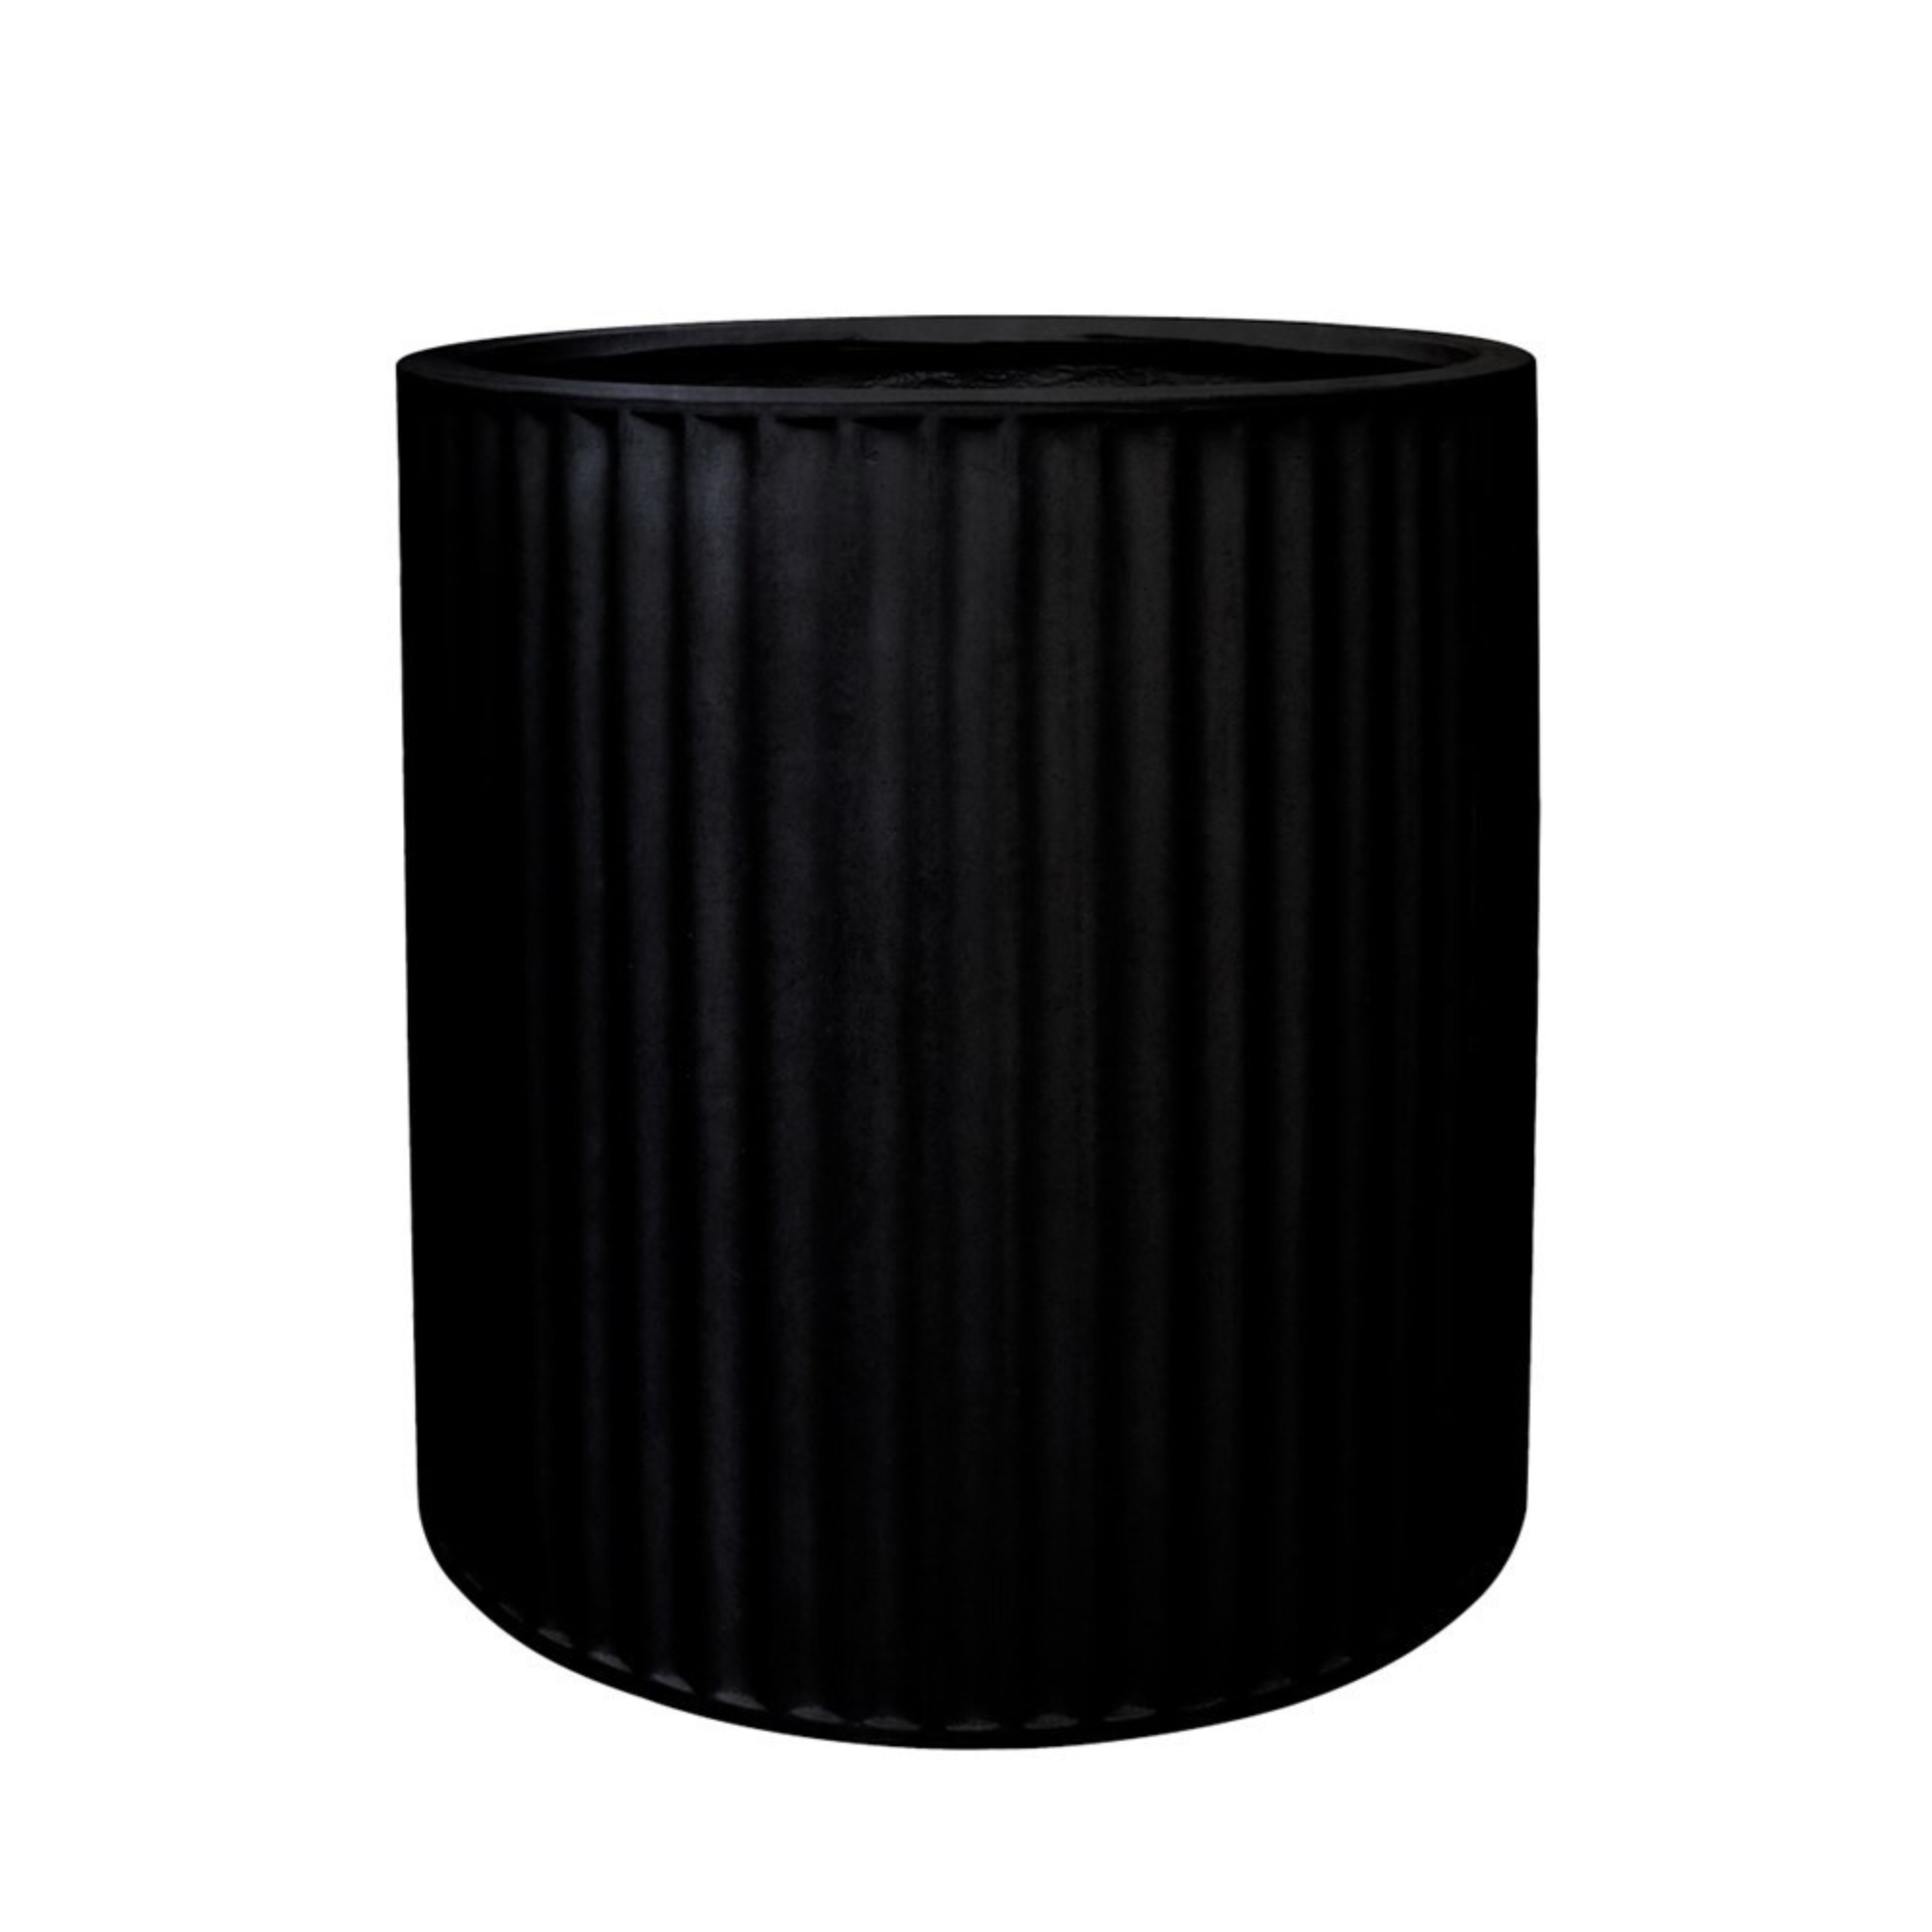 PIAKO RIBBED CYLINDER PLANTER | 3 SIZES | BLACK, WHITE OR WEATHERED CEMENT